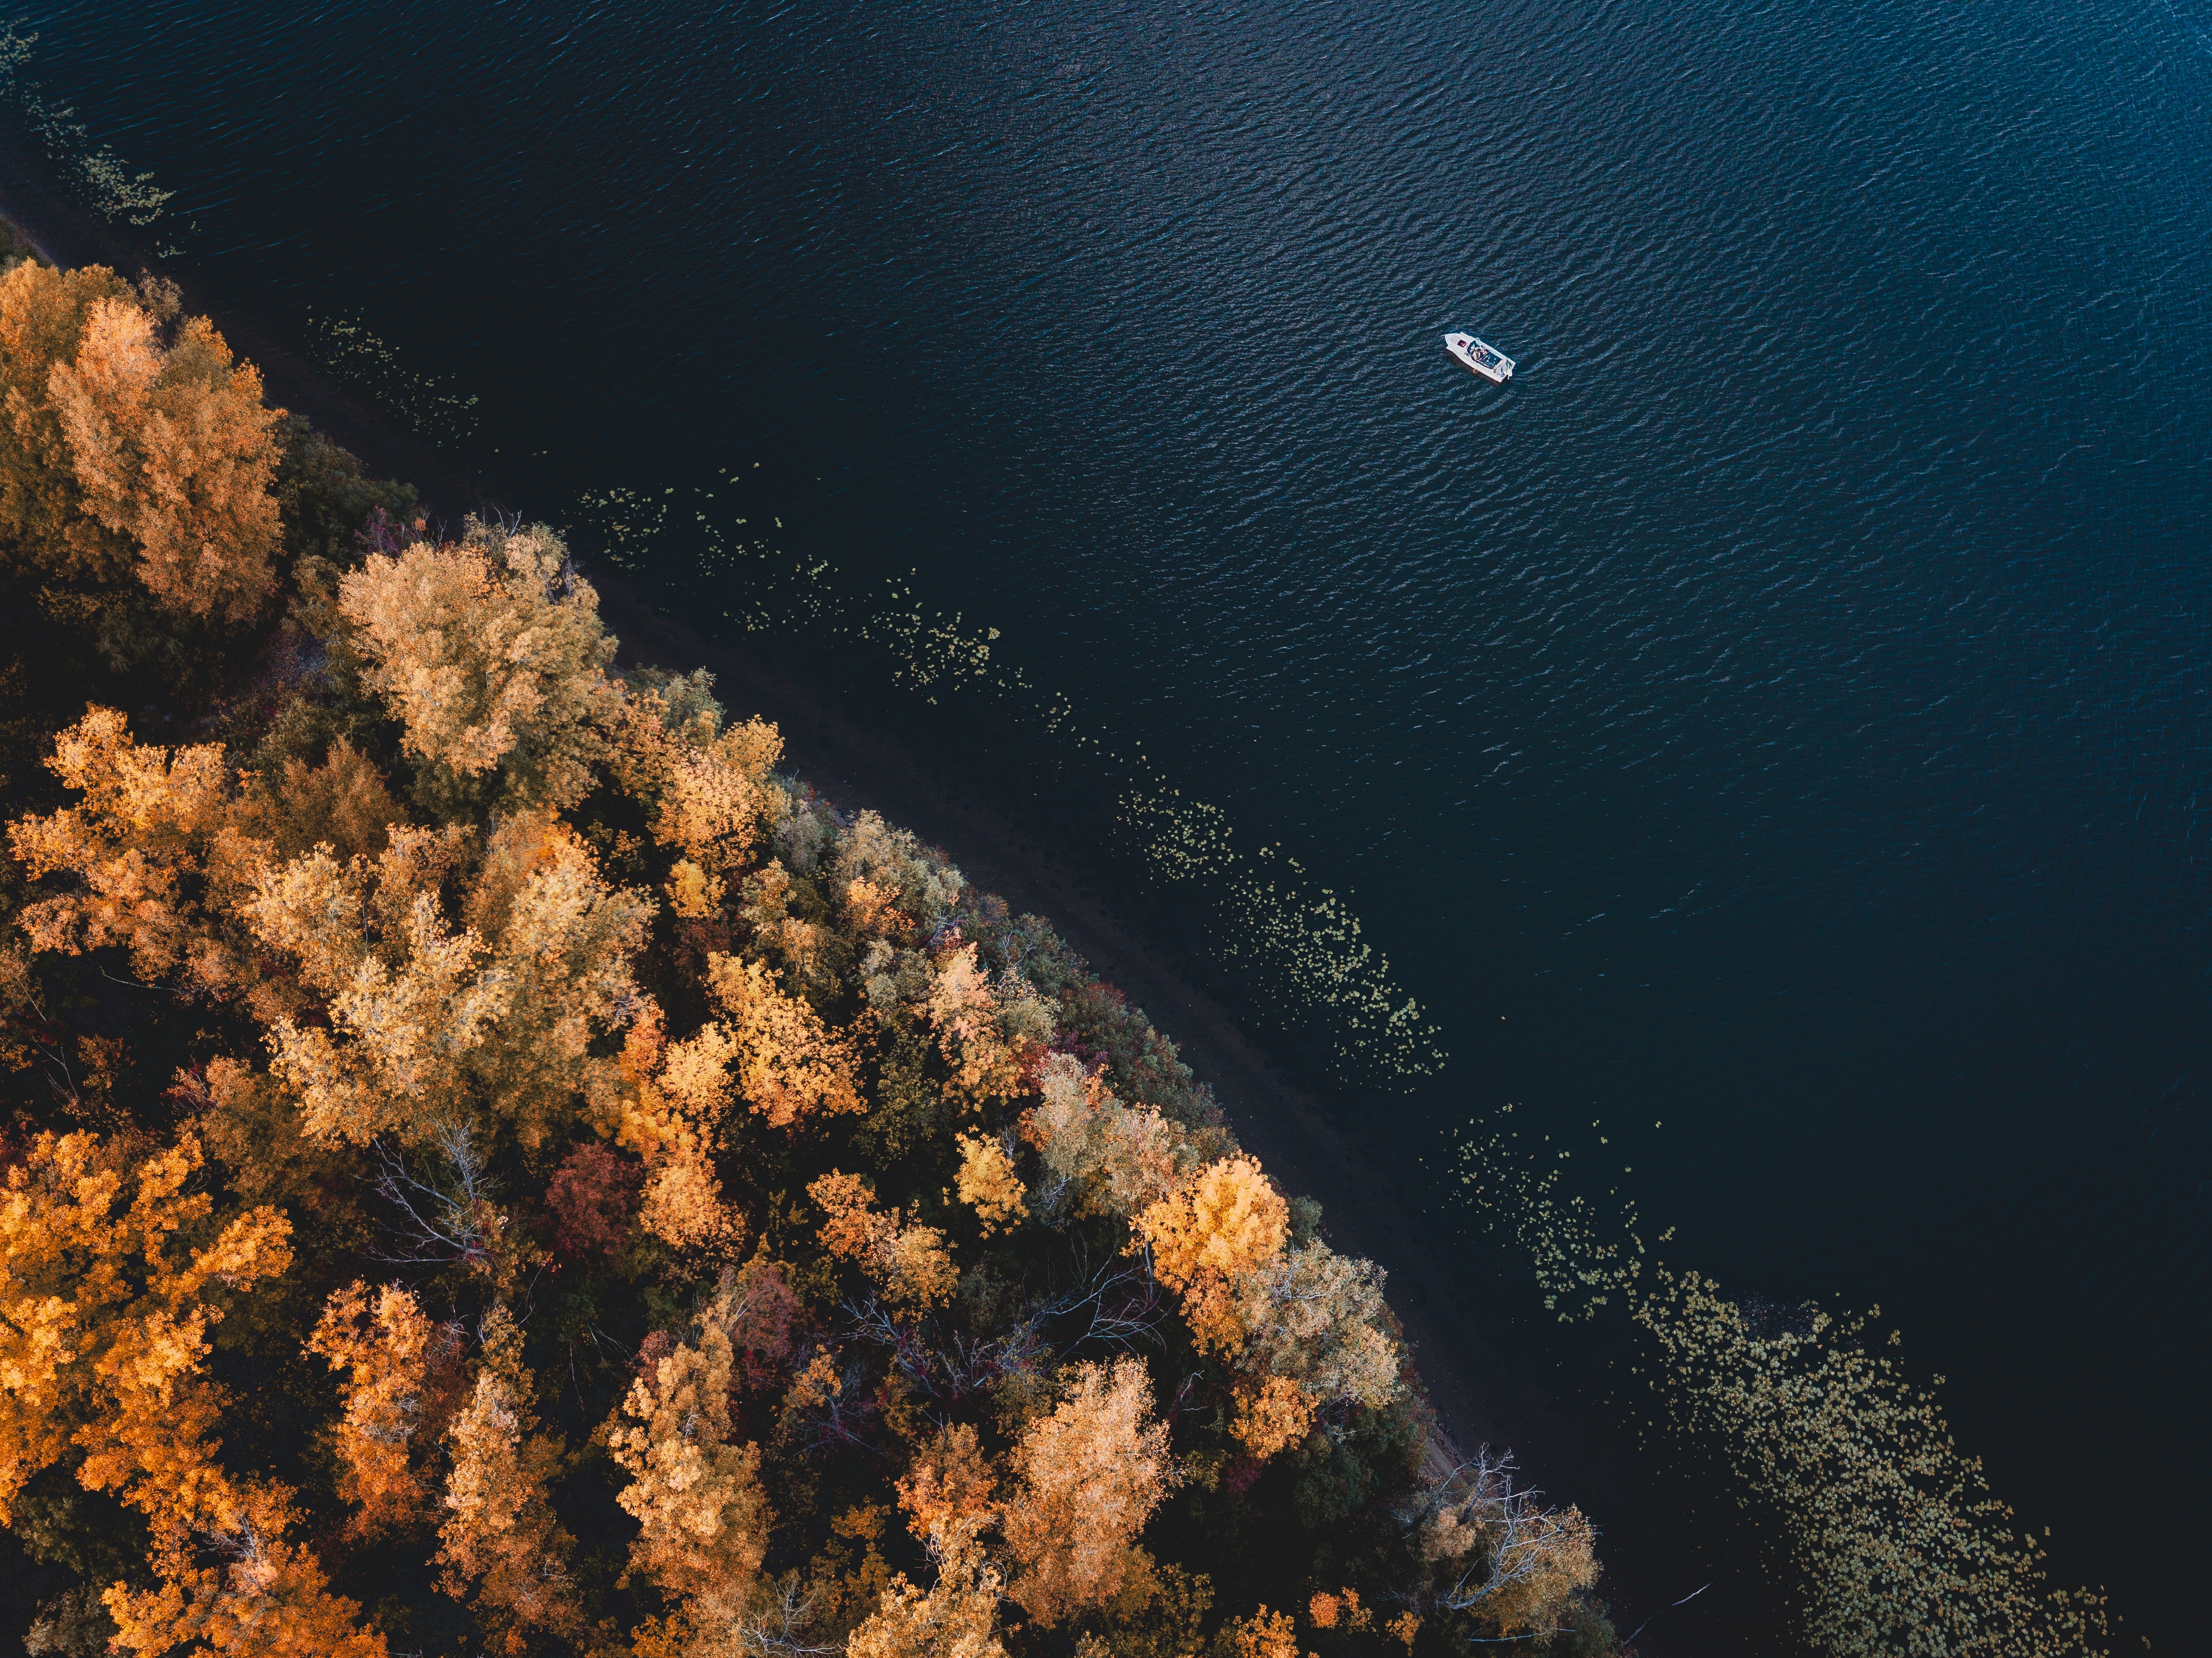 Wallpaper Full HD view from above, nature, trees, coast, boat